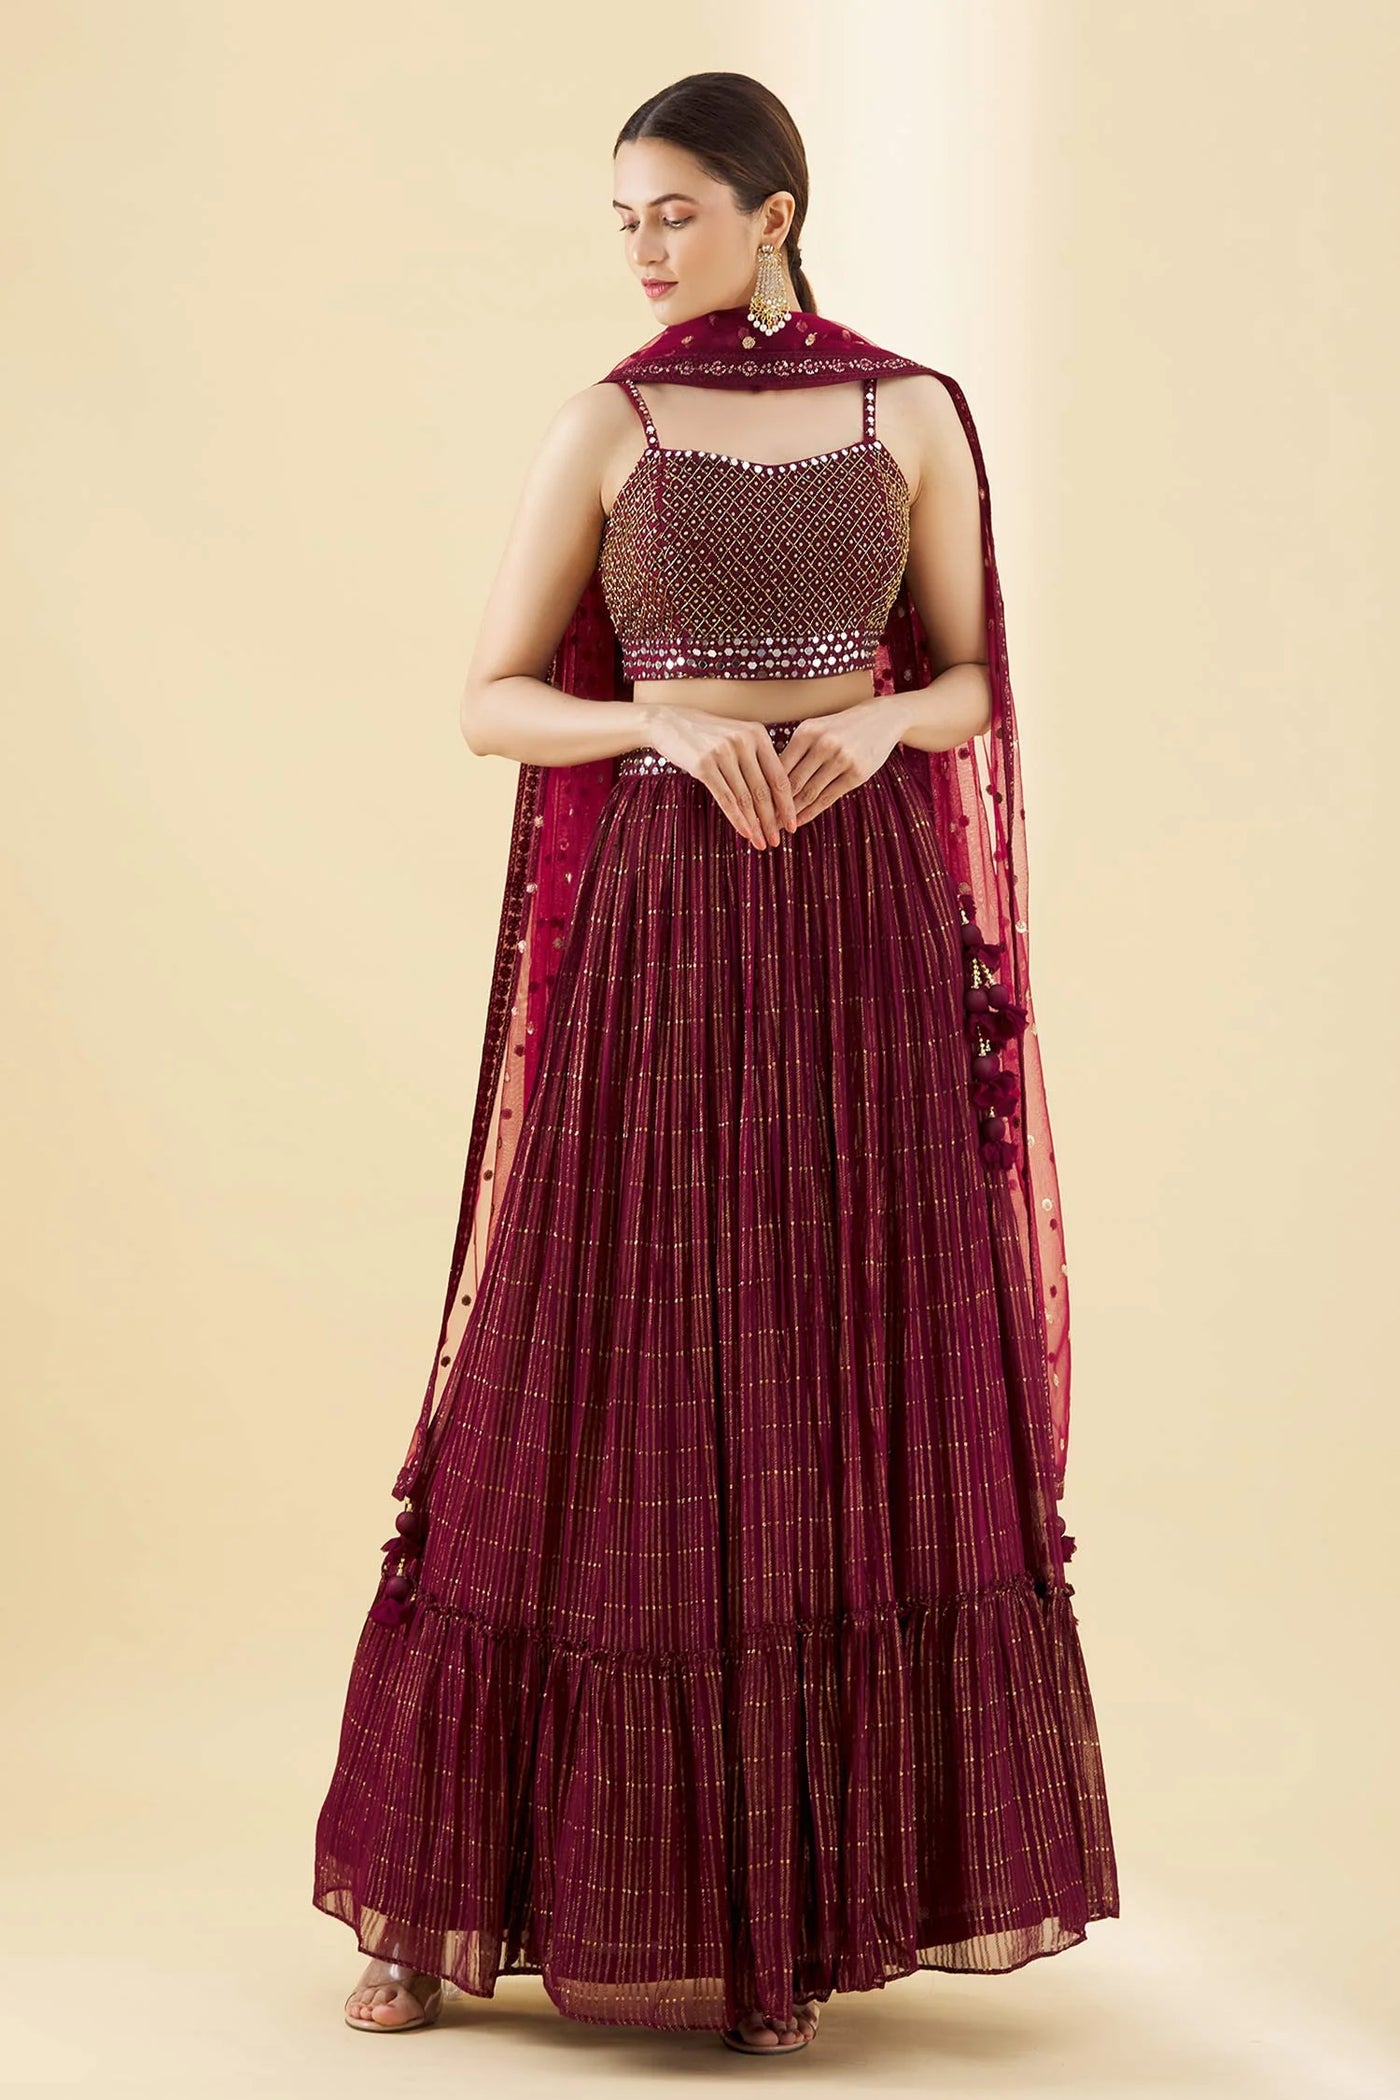 Purple Net Georgette Lehenga Indian Clothing in Denver, CO, Aurora, CO, Boulder, CO, Fort Collins, CO, Colorado Springs, CO, Parker, CO, Highlands Ranch, CO, Cherry Creek, CO, Centennial, CO, and Longmont, CO. NATIONWIDE SHIPPING USA- India Fashion X